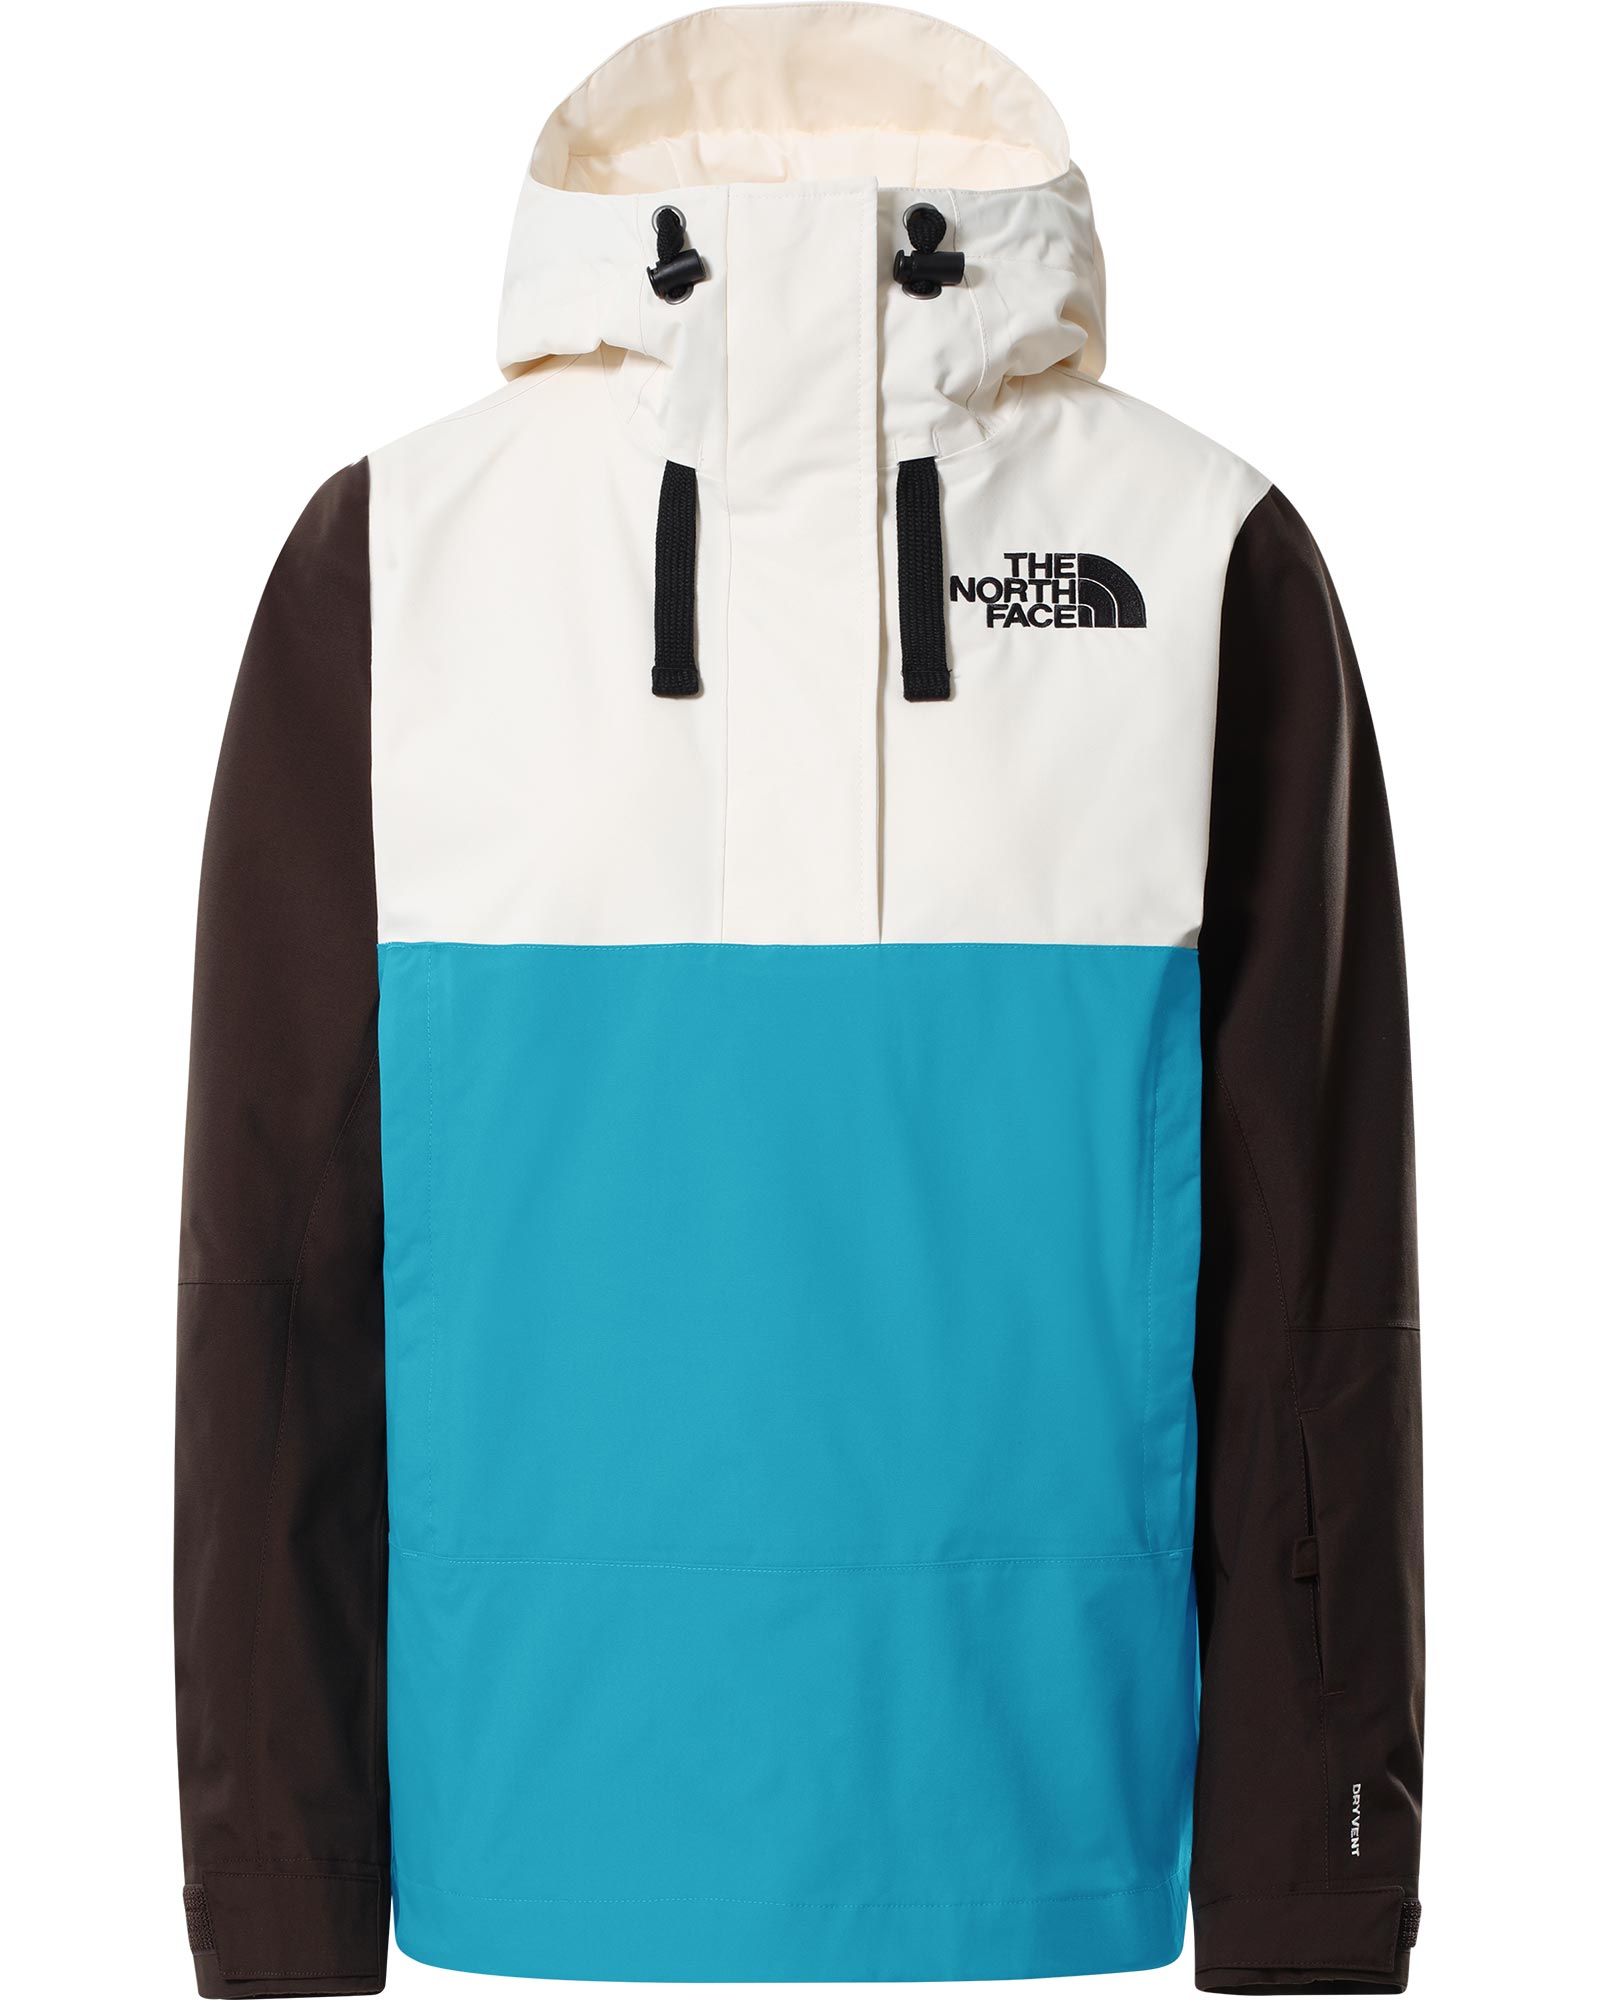 The North Face Tanager Women’s Anorak - Gardenia White/Deep Brown/Enamel Blue S